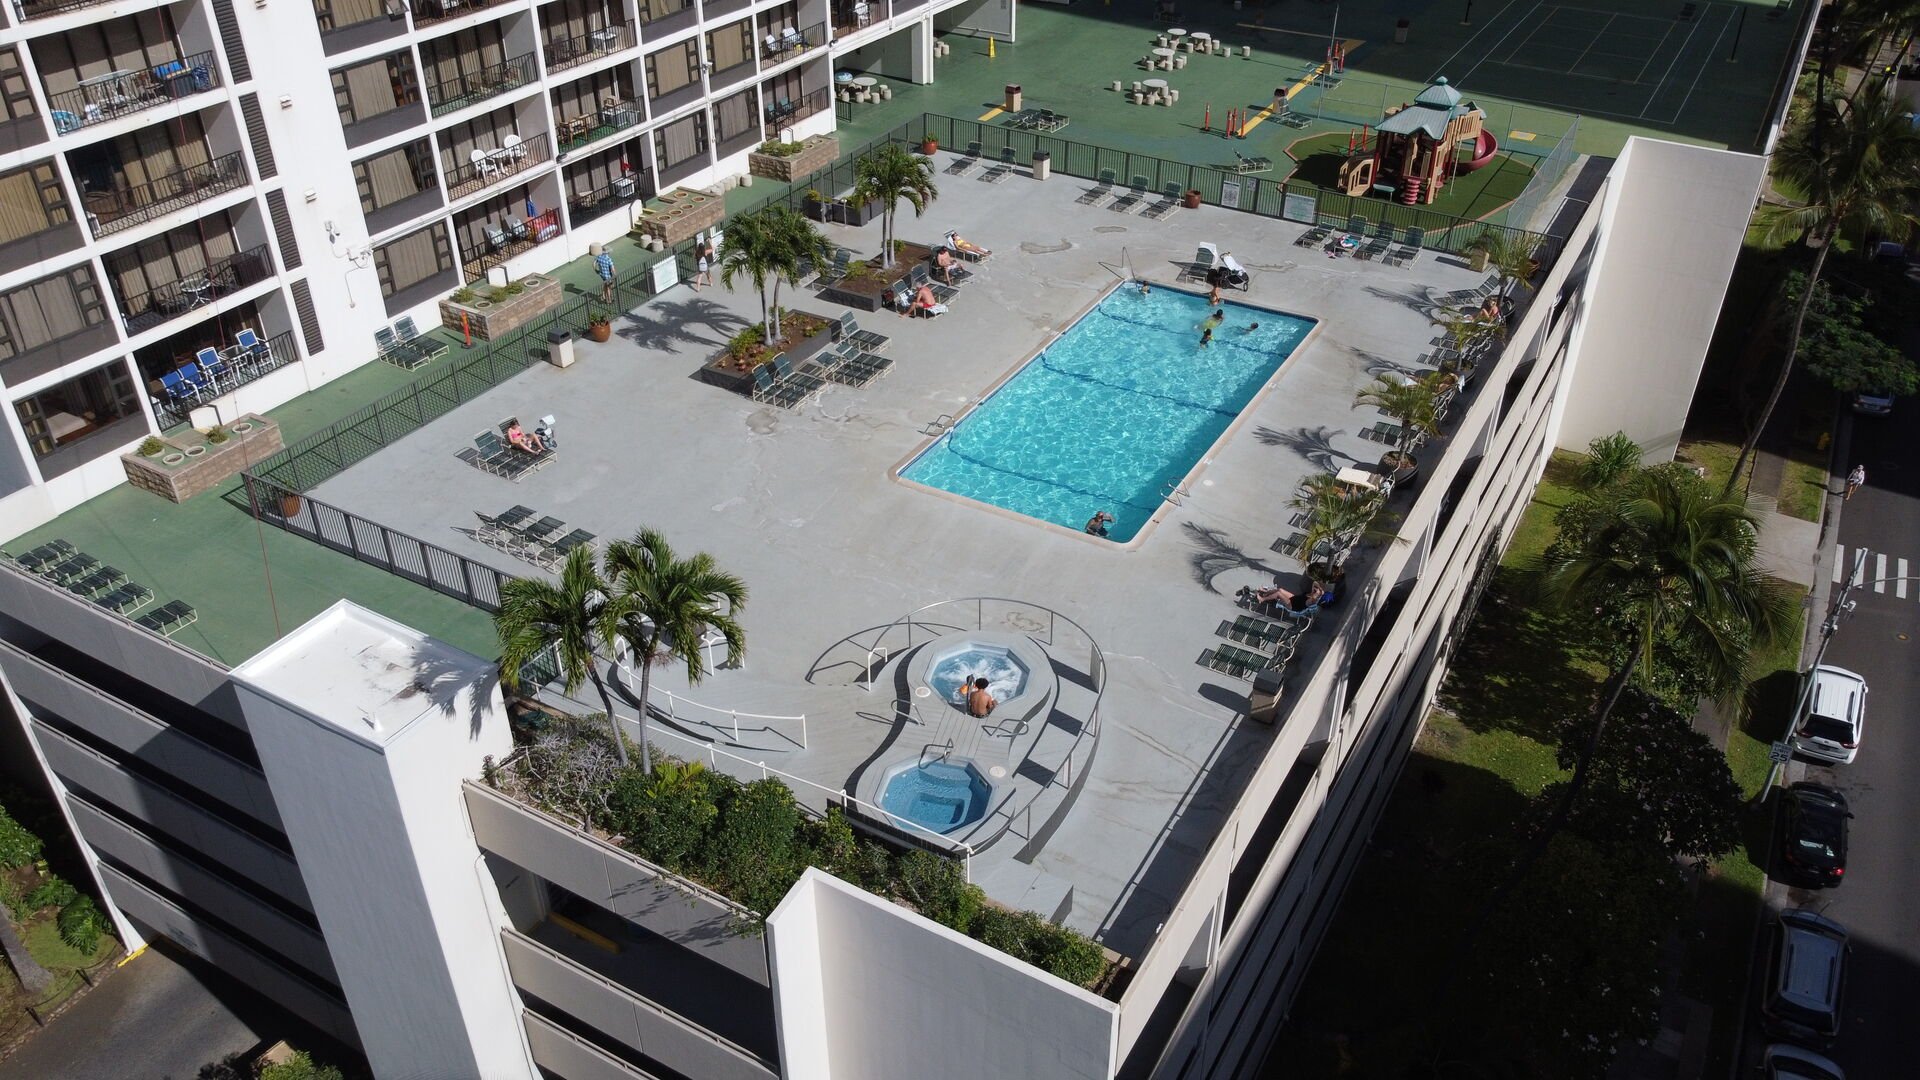 Recreation Deck on the 6th floor includes pool, hot tub, BBQ area, and playground